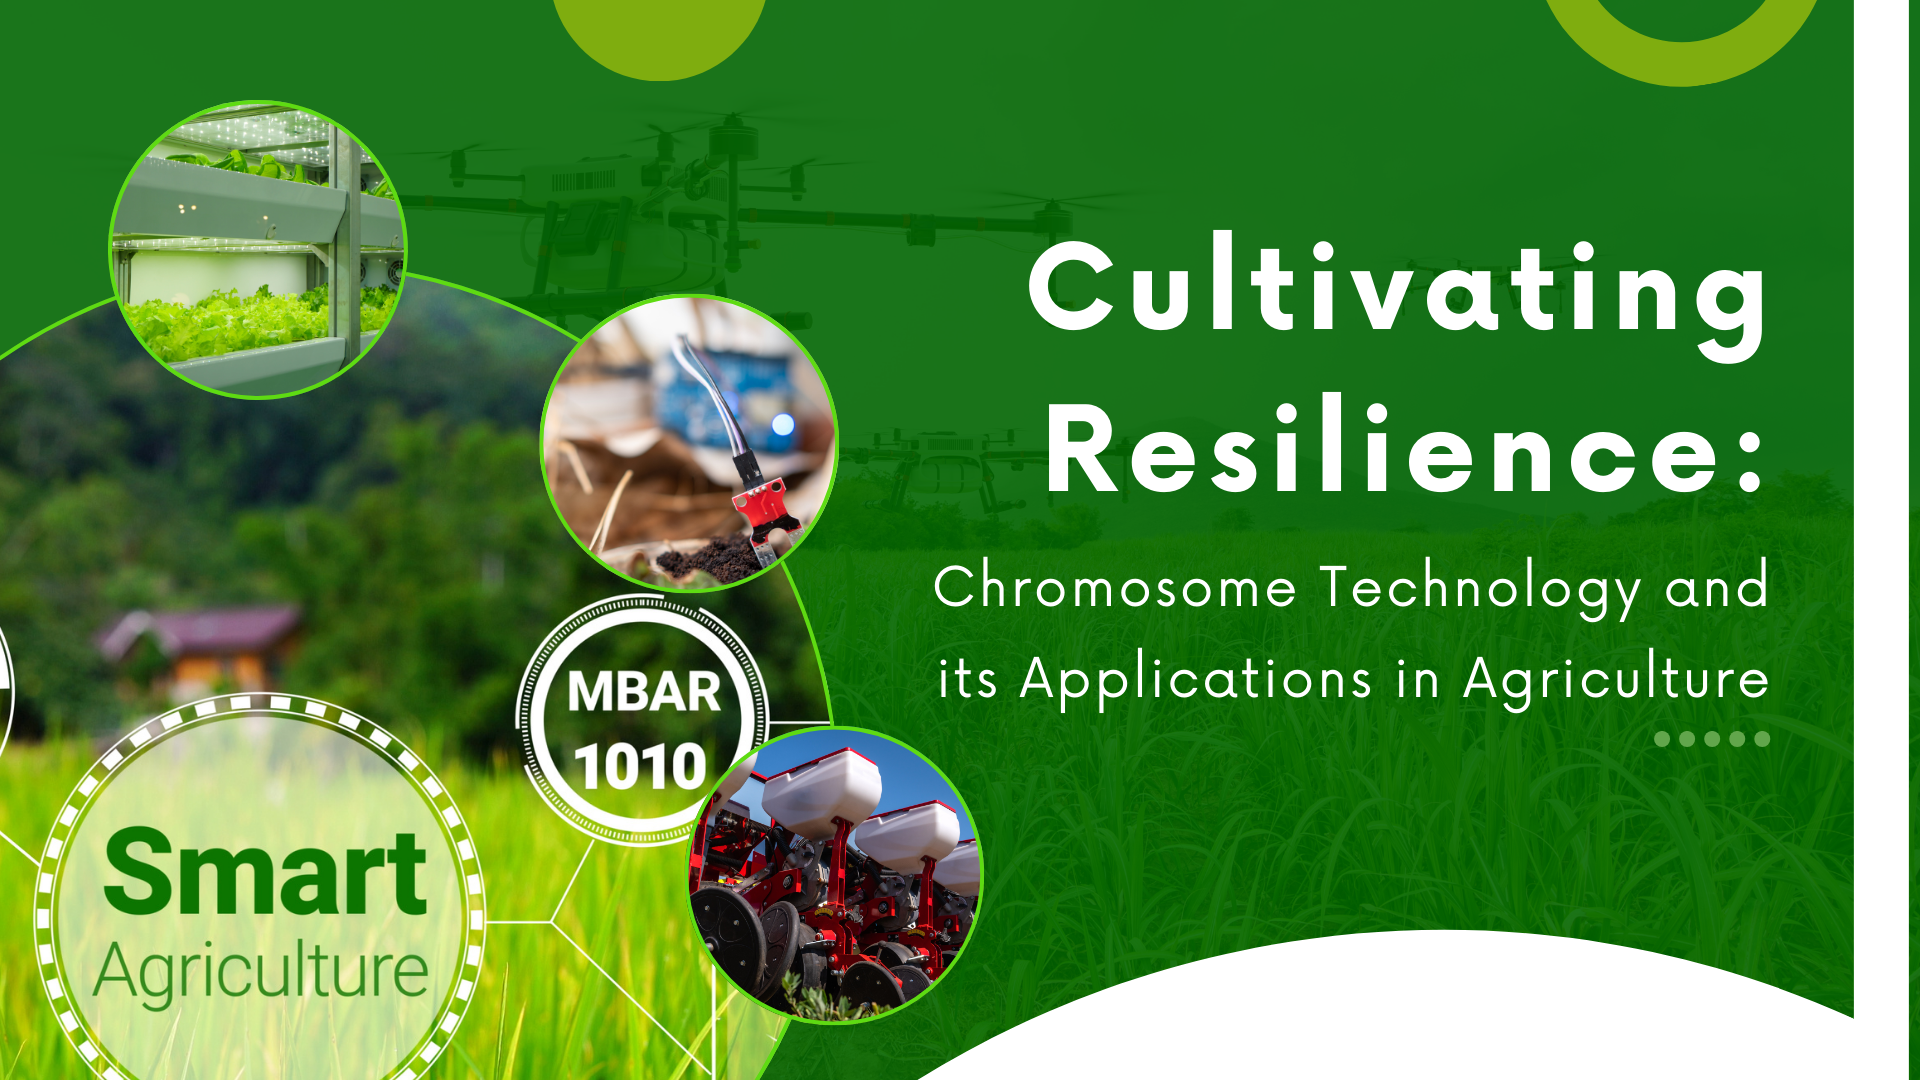 Cultivating Resilience: Chromosome Technology and its Applications in Agriculture